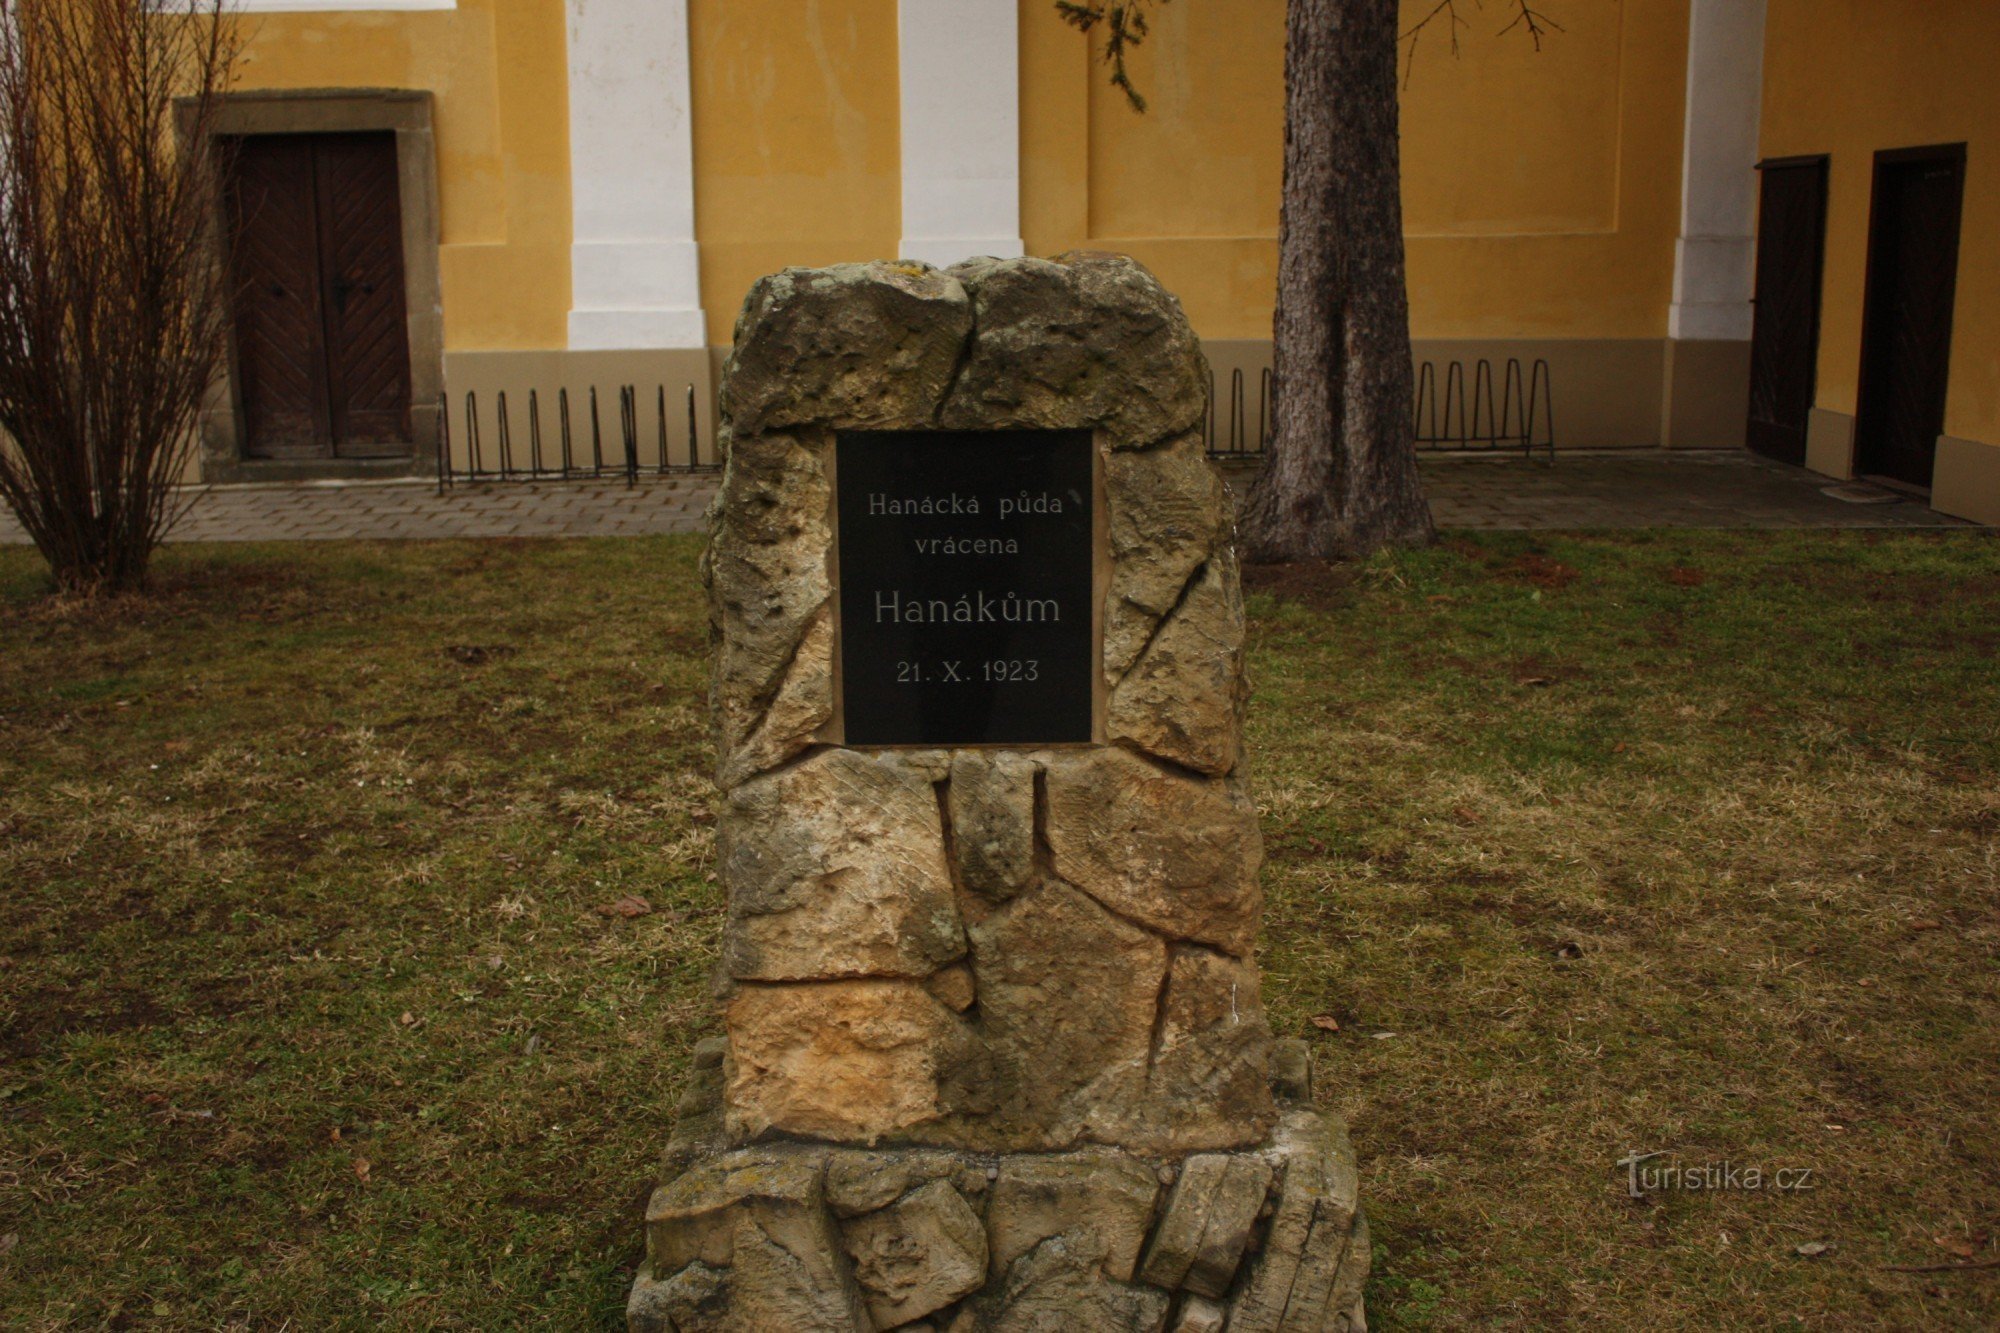 Monument to the land reform of 1923 in Chropyn